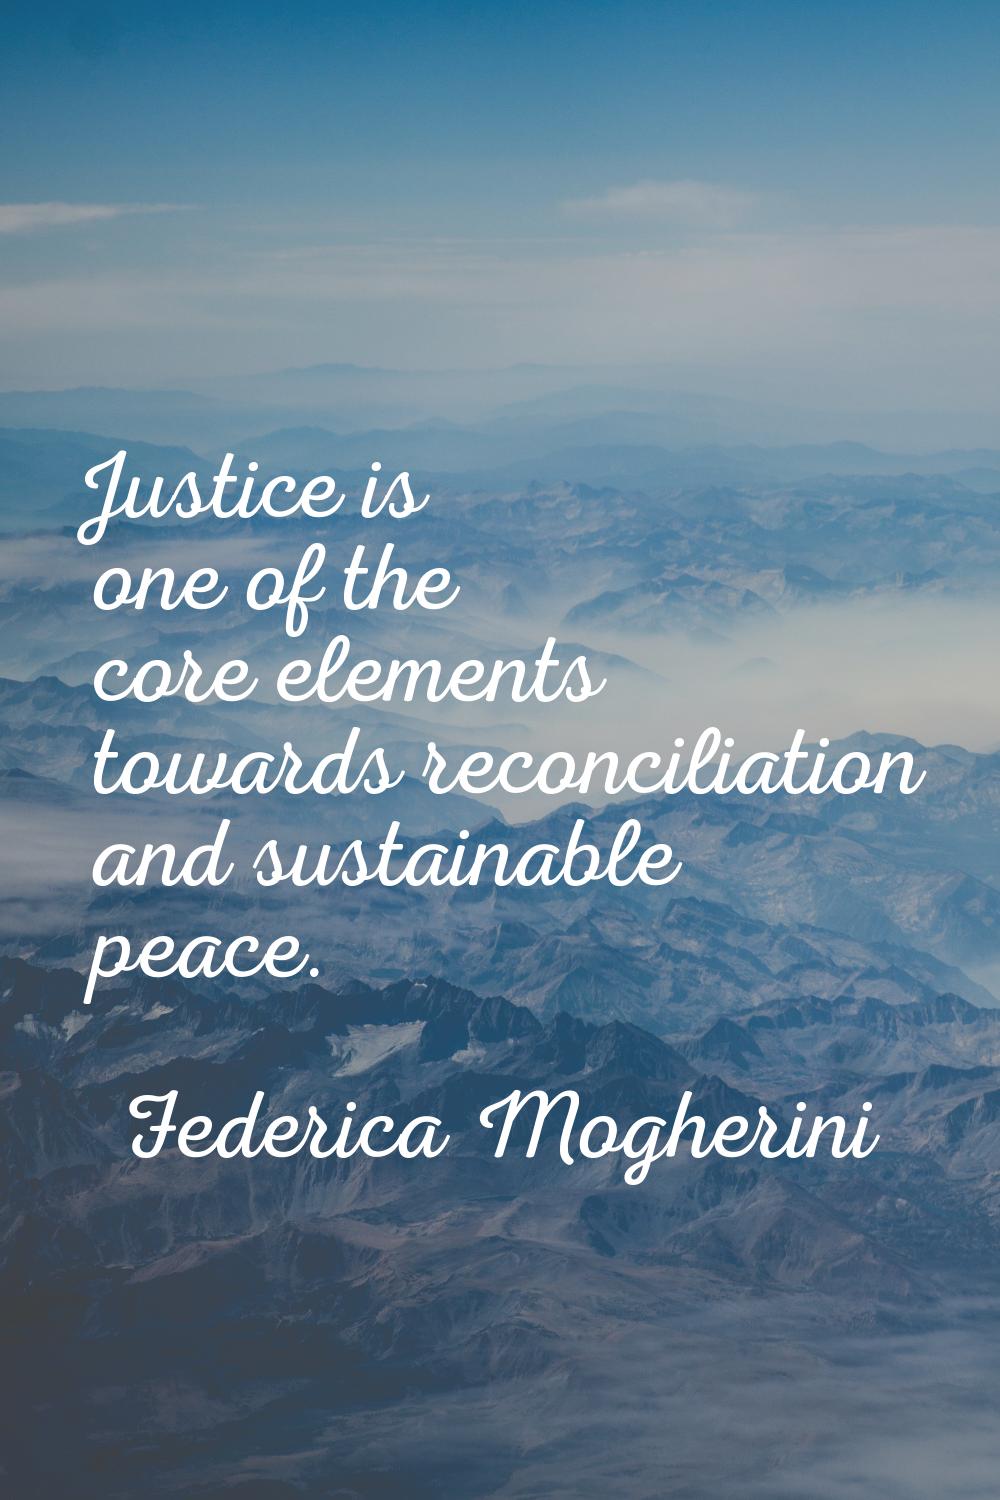 Justice is one of the core elements towards reconciliation and sustainable peace.